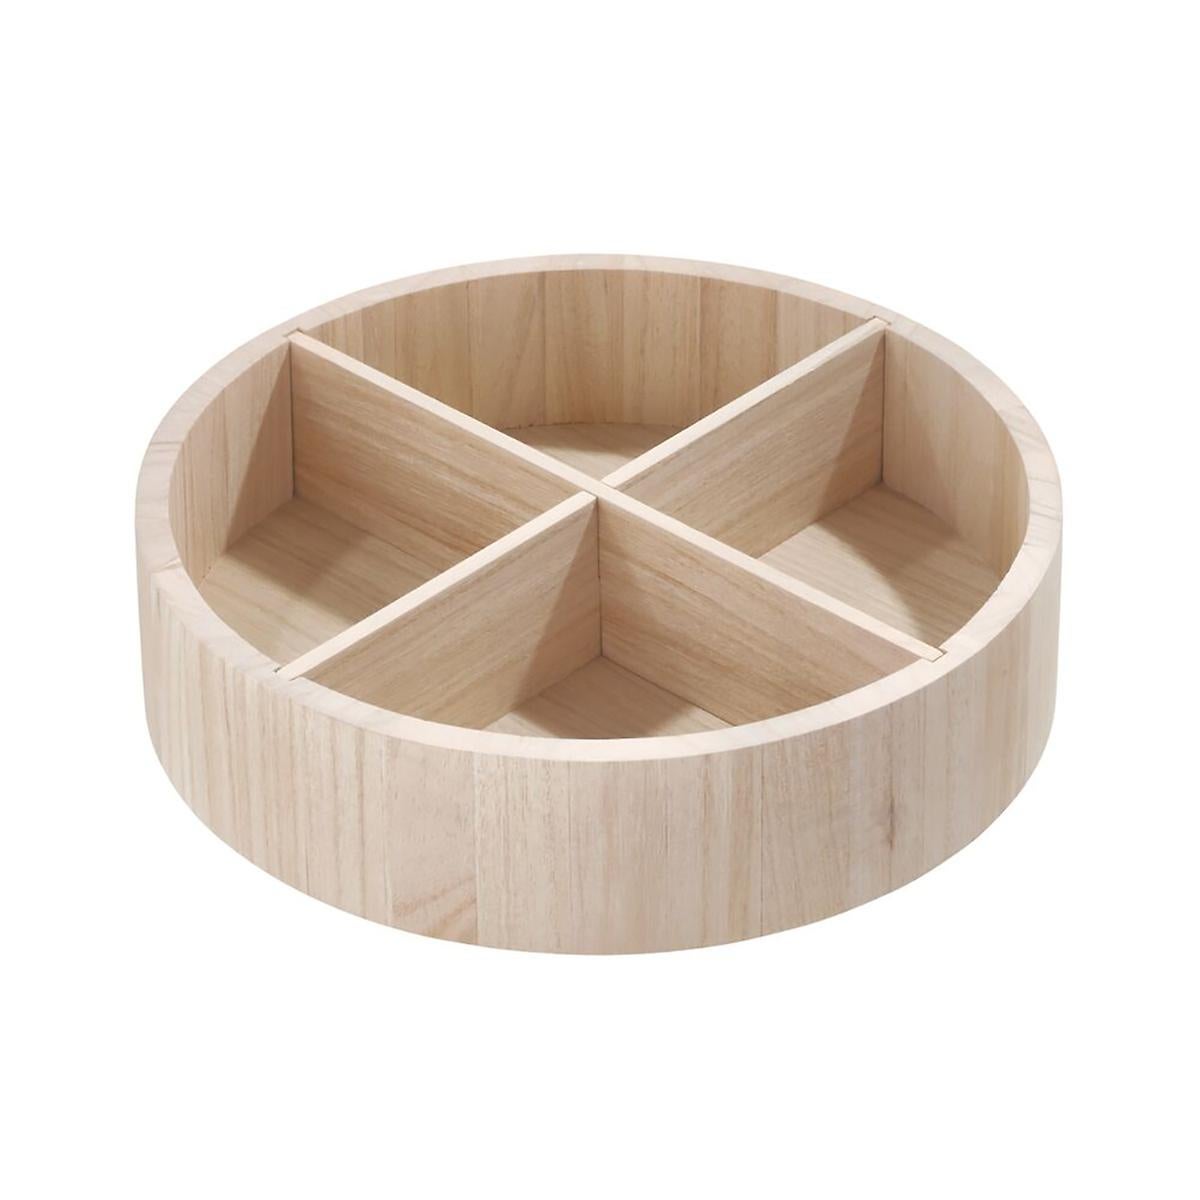 The Home Edit Divided Lazy Susan